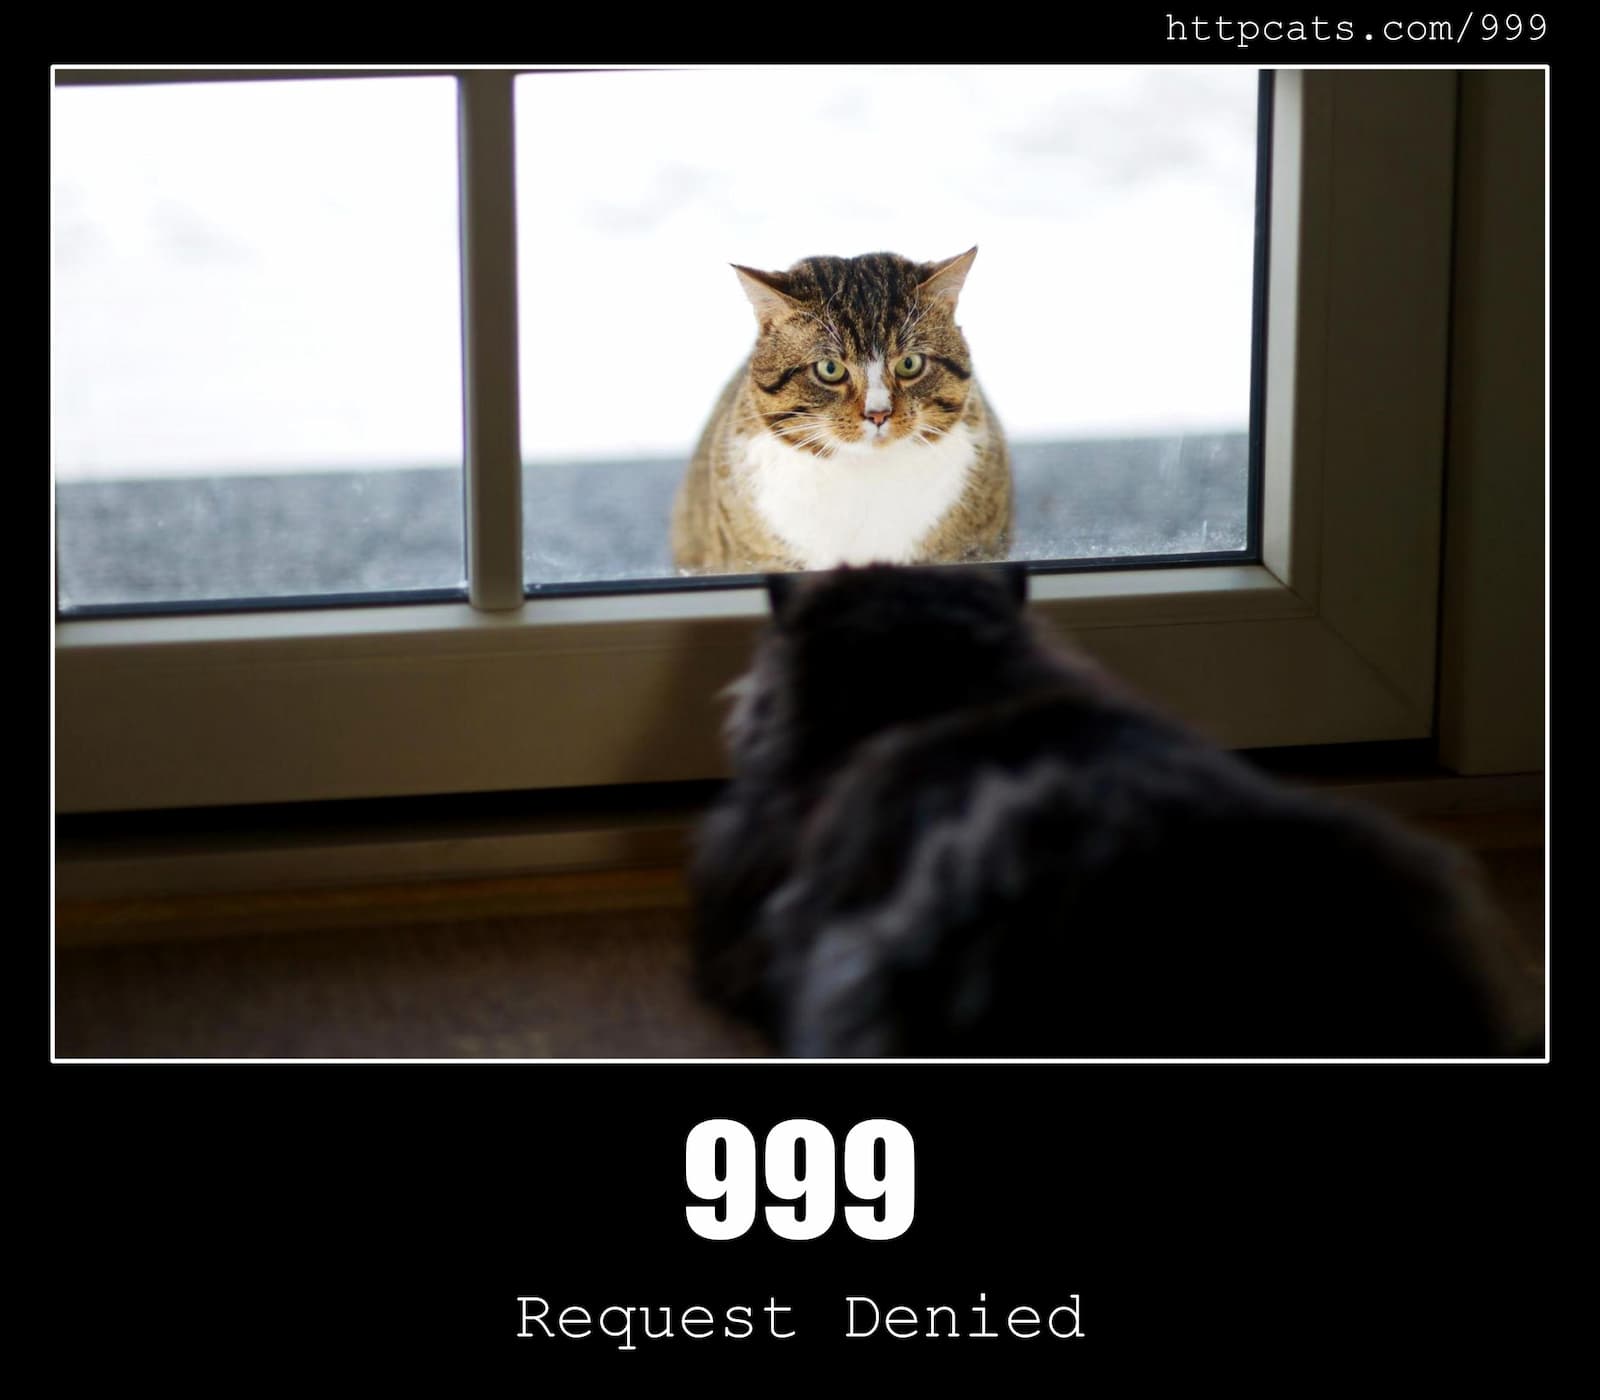 HTTP Status Code 999 Request Denied & Cats